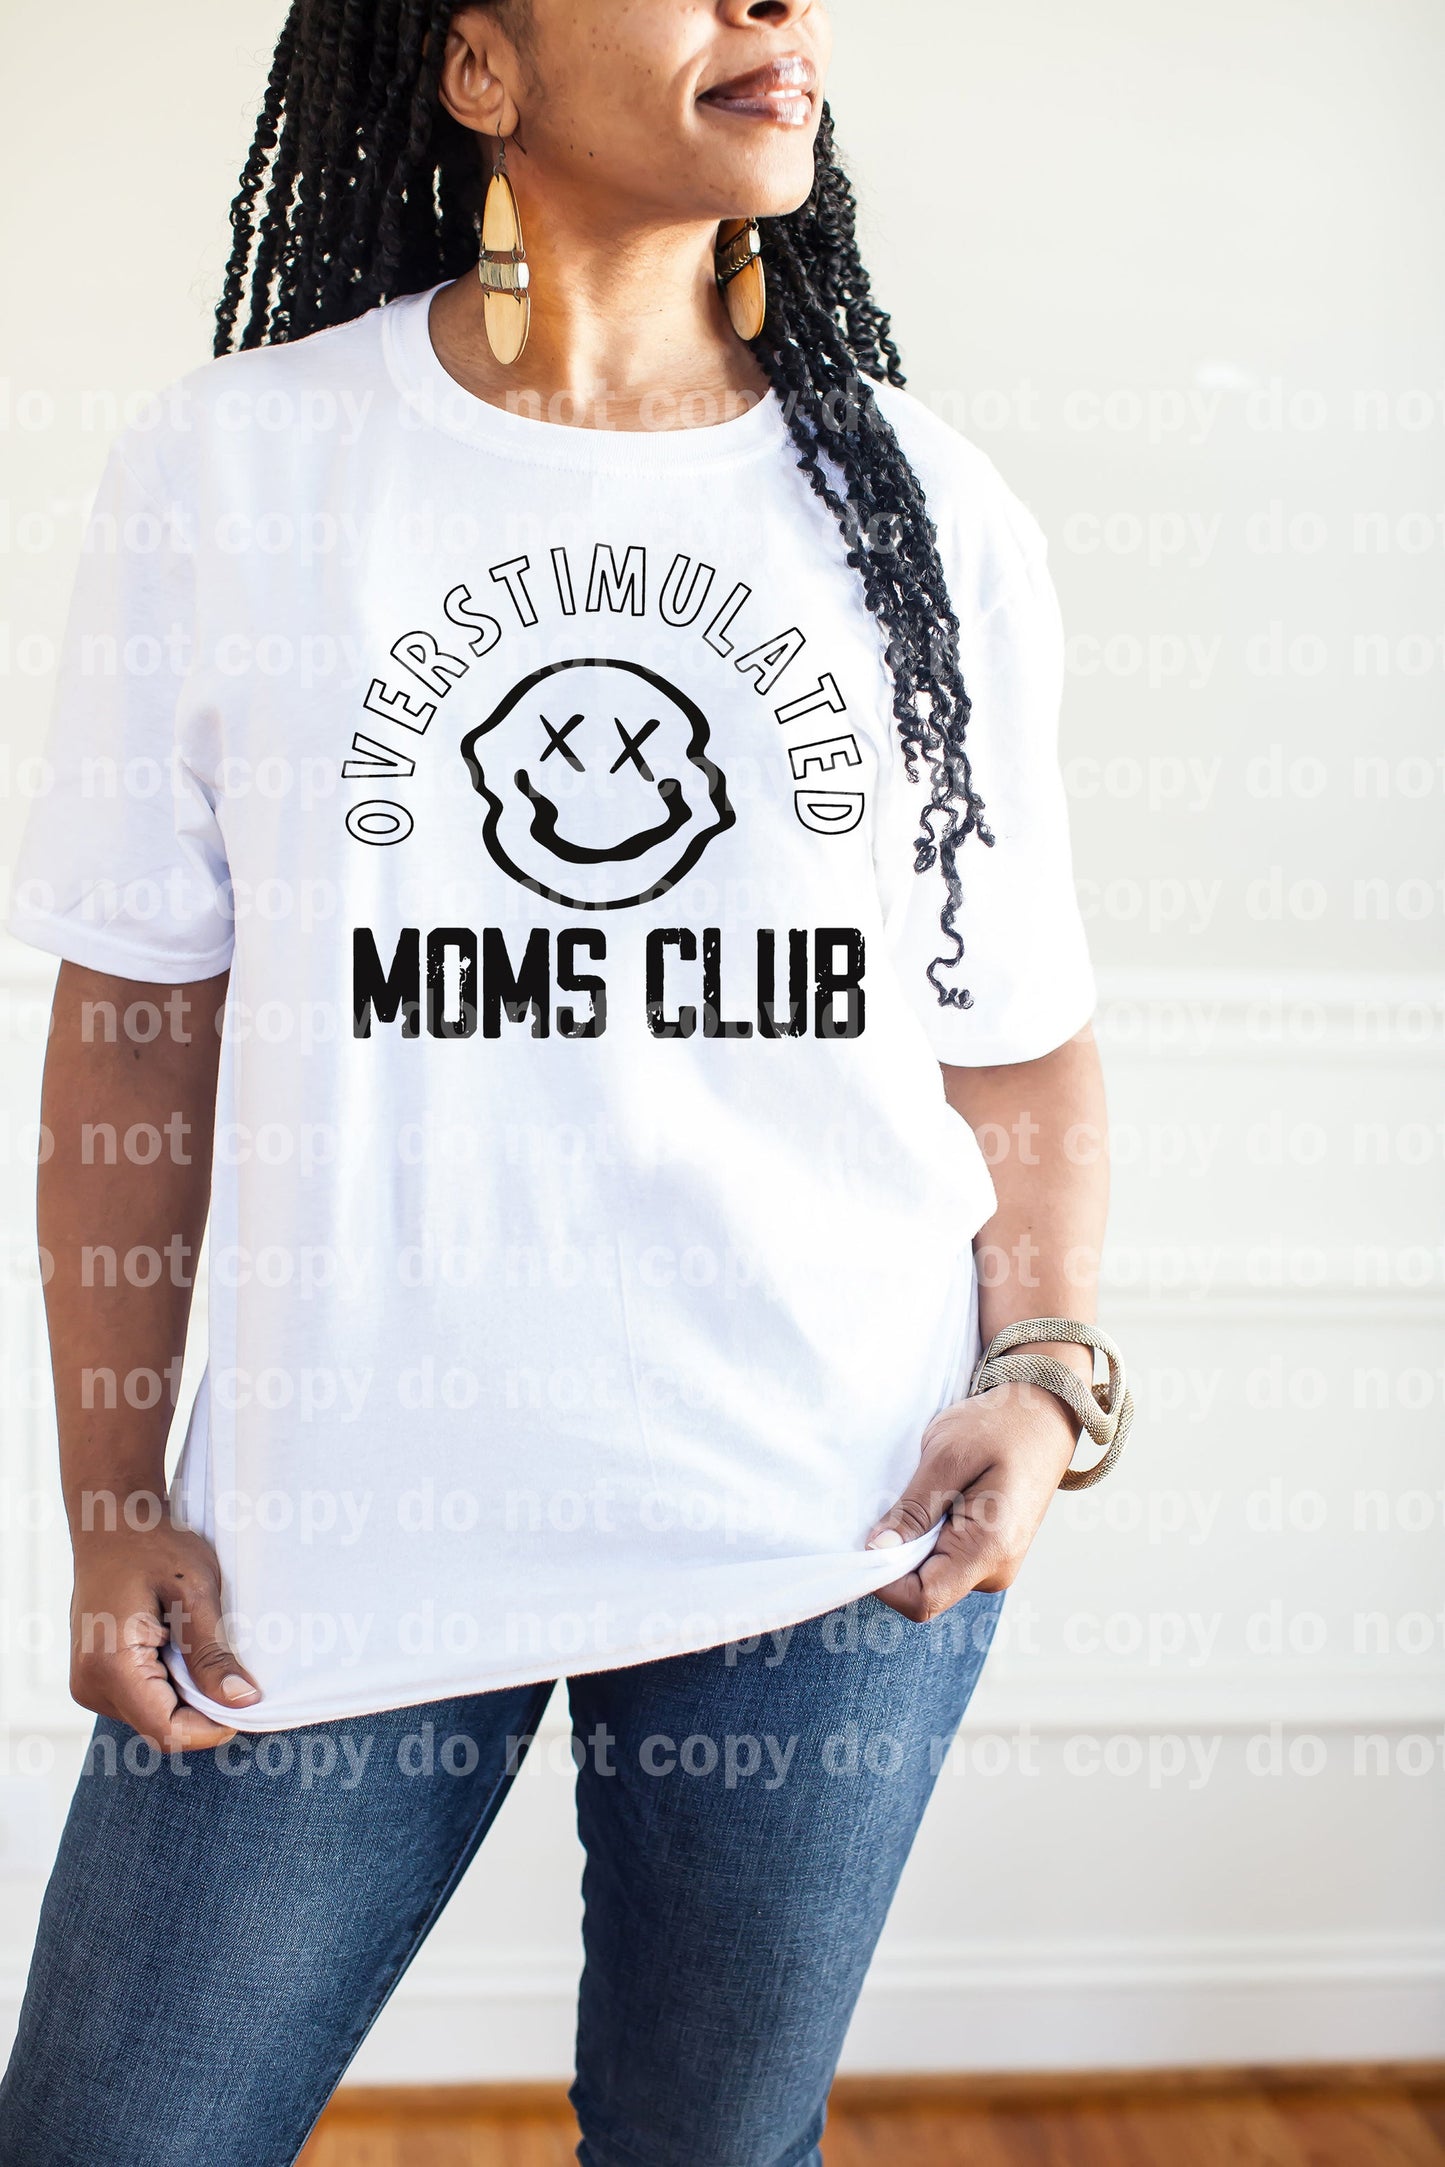 Overstimulated Moms Club Dream Print or Sublimation Print